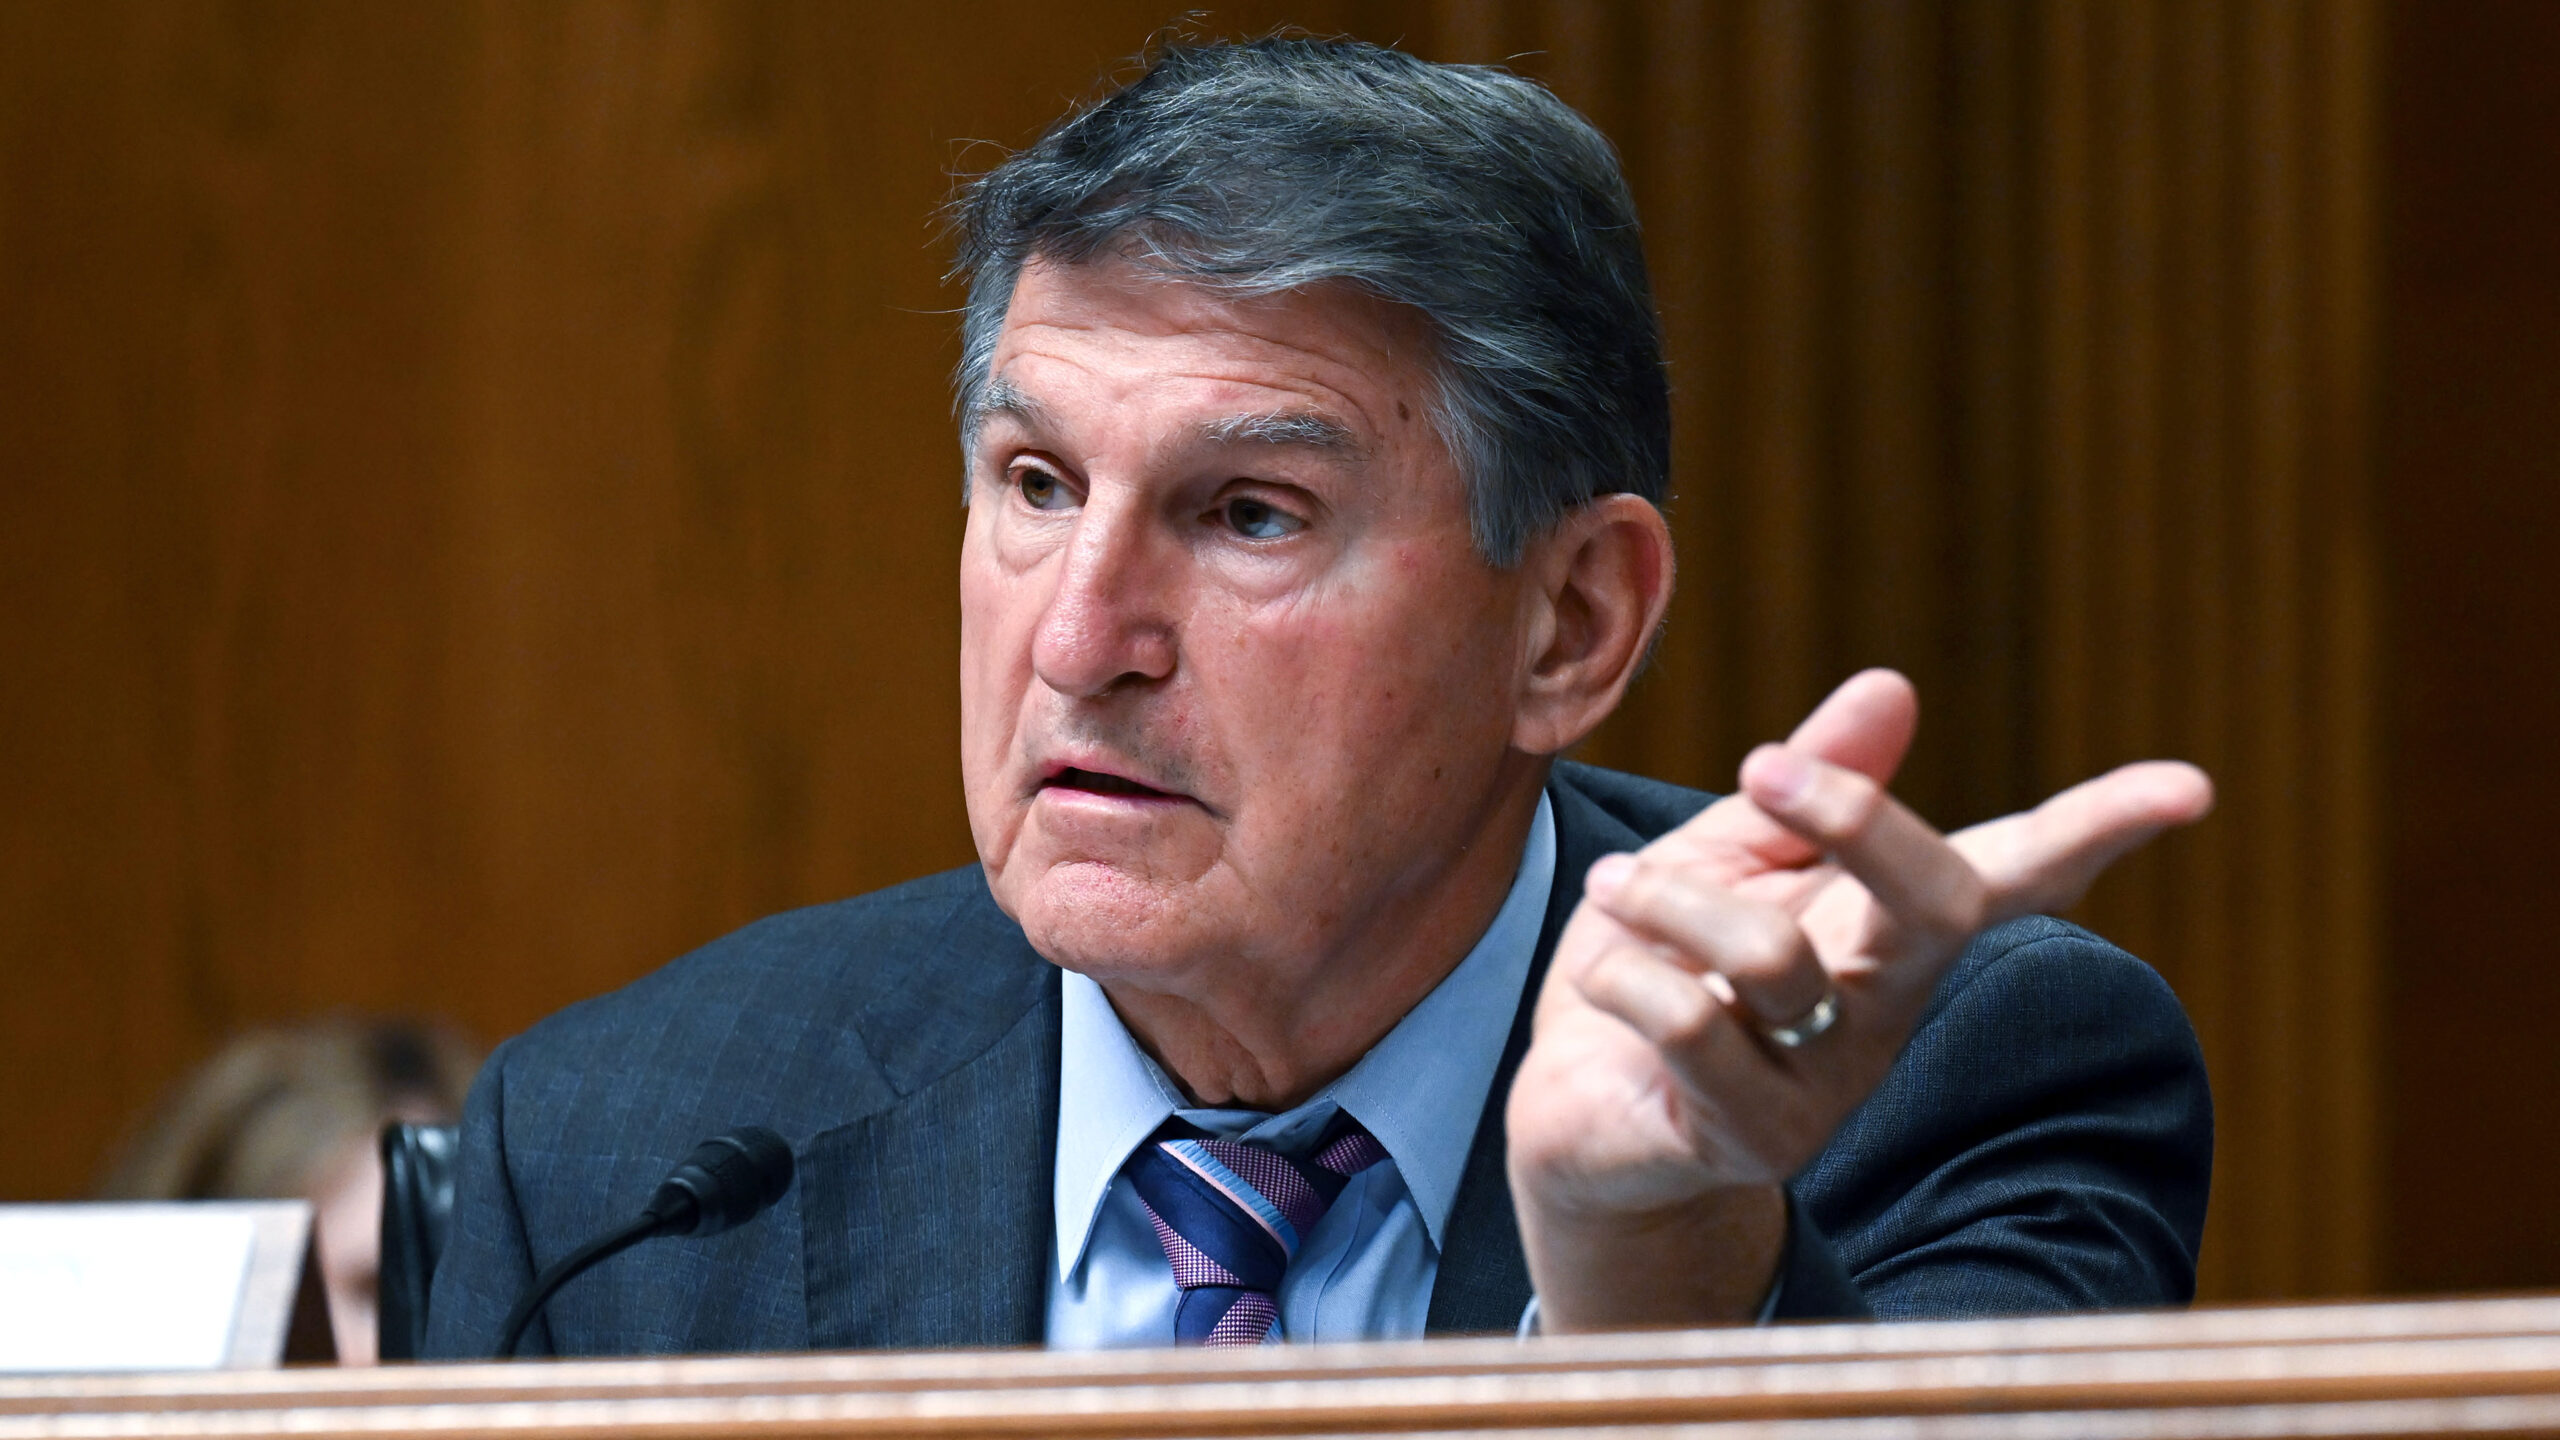 Manchin Gives Timeline For Deciding On If He’ll Launch Presidential Bid